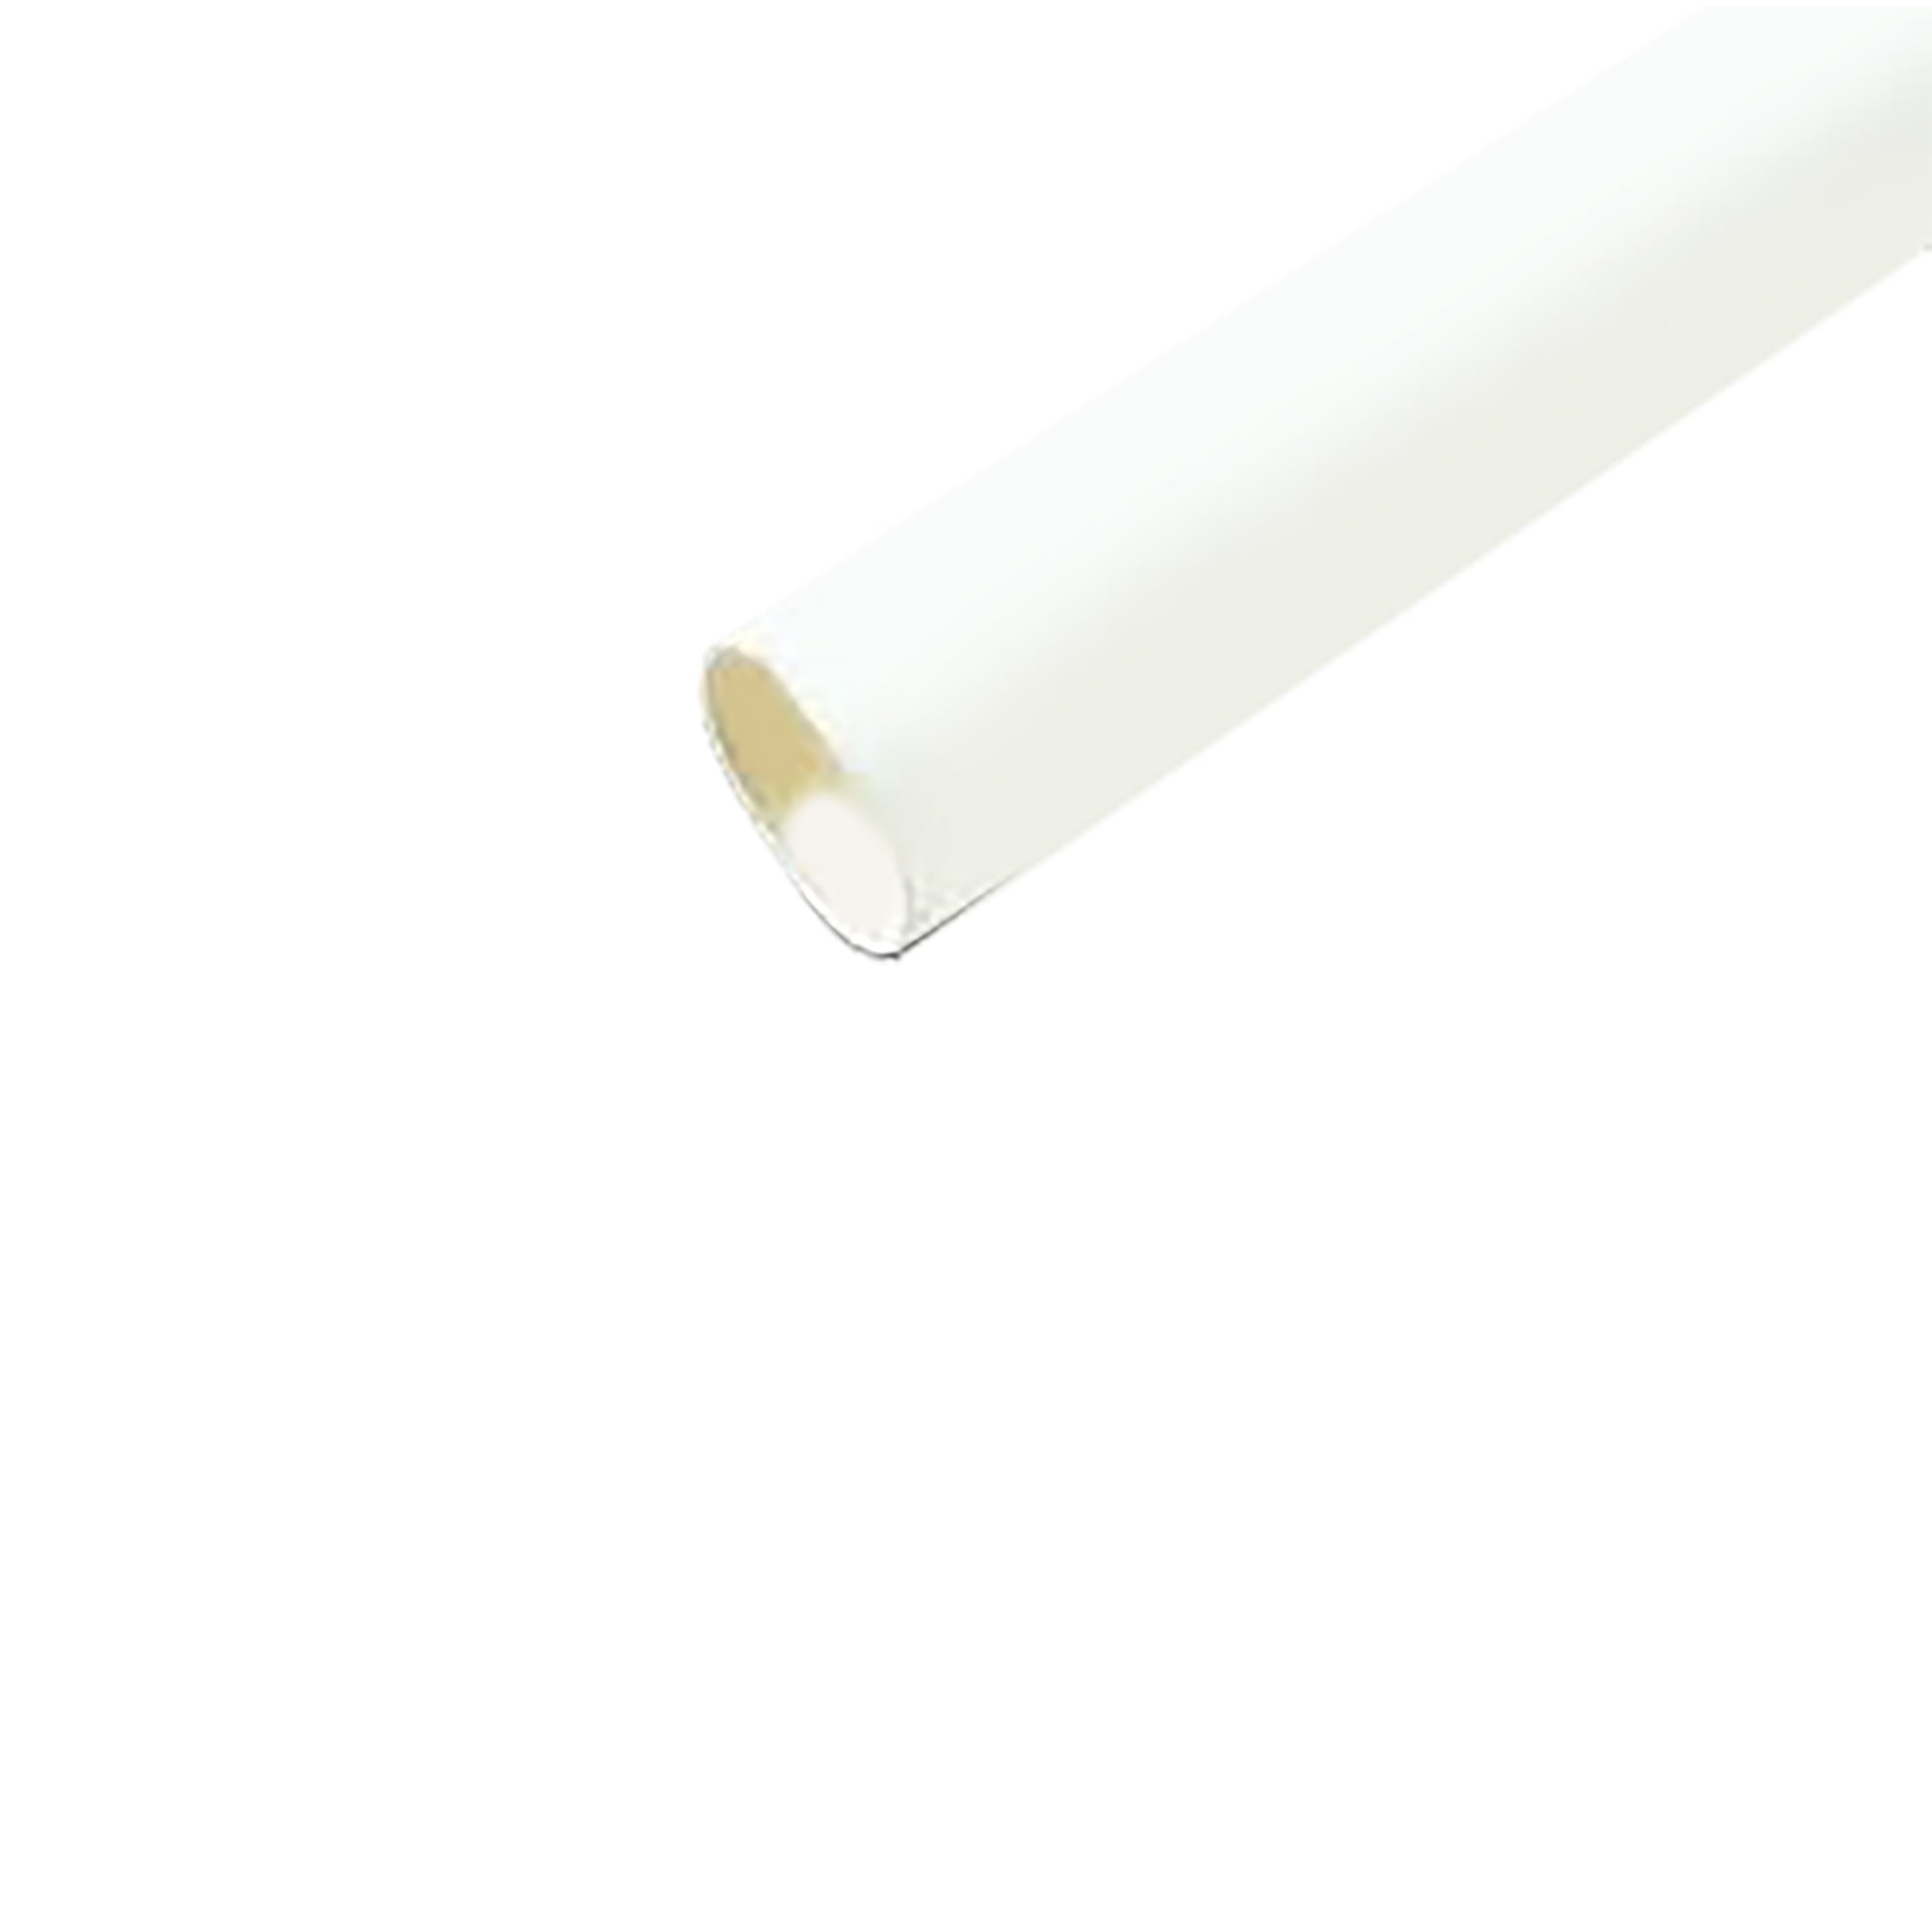 Flexible Thin Single Wall Non-Adhesive Heat Shrink Tubing 2:1 White 3/4" ID - 48" Inch 4 Pack